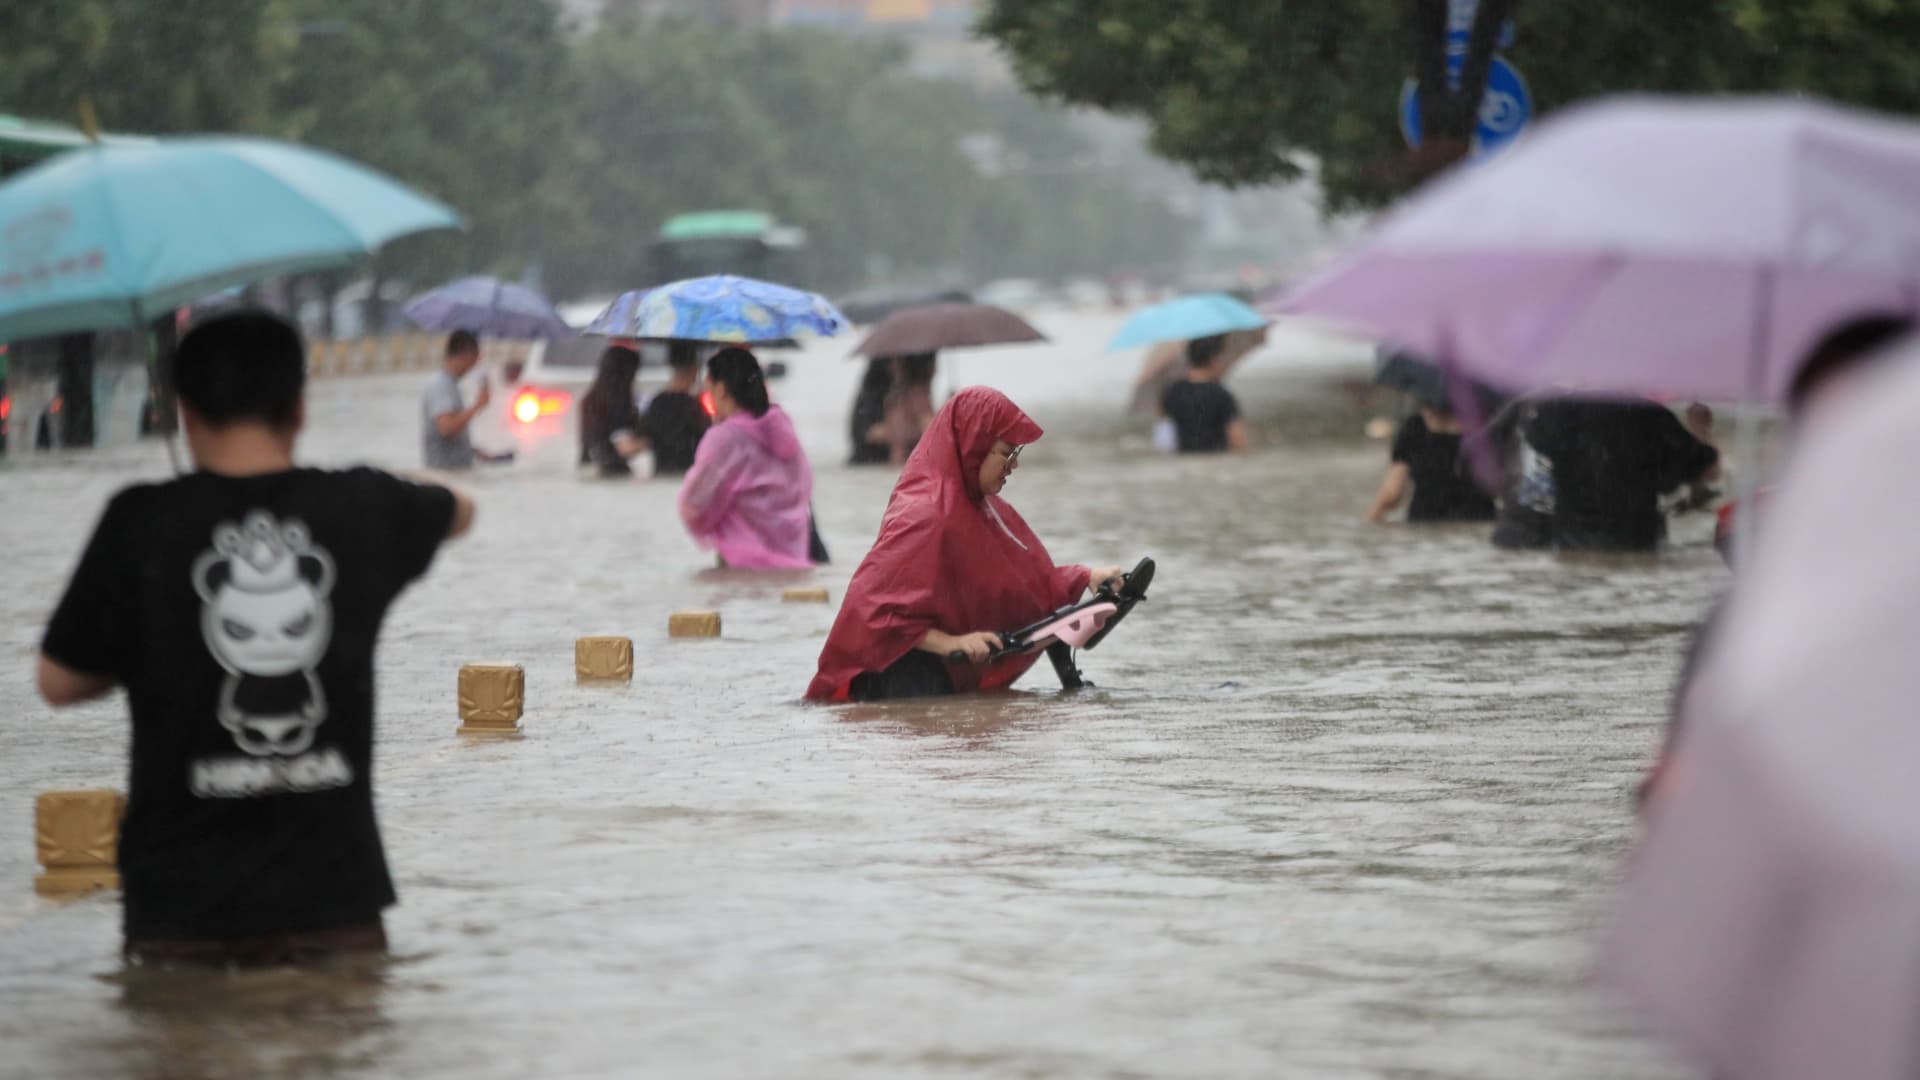 Residents wade through floodwaters on a flooded road amid heavy rainfall in Zhengzhou, Henan province, China July 20, 2021.